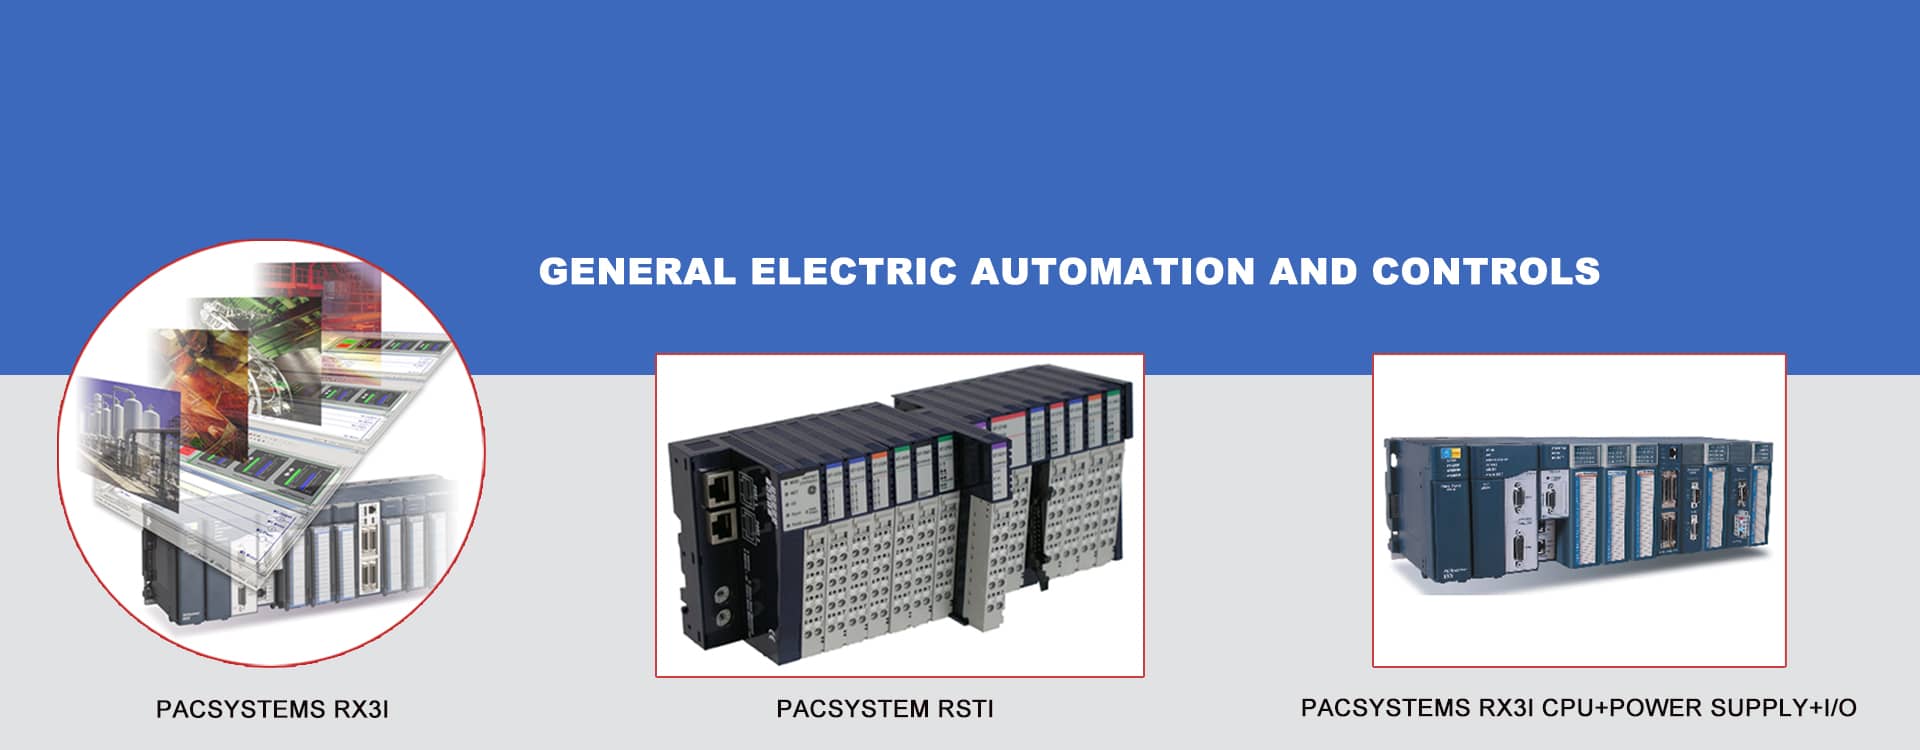 General Electric Automation and Controls